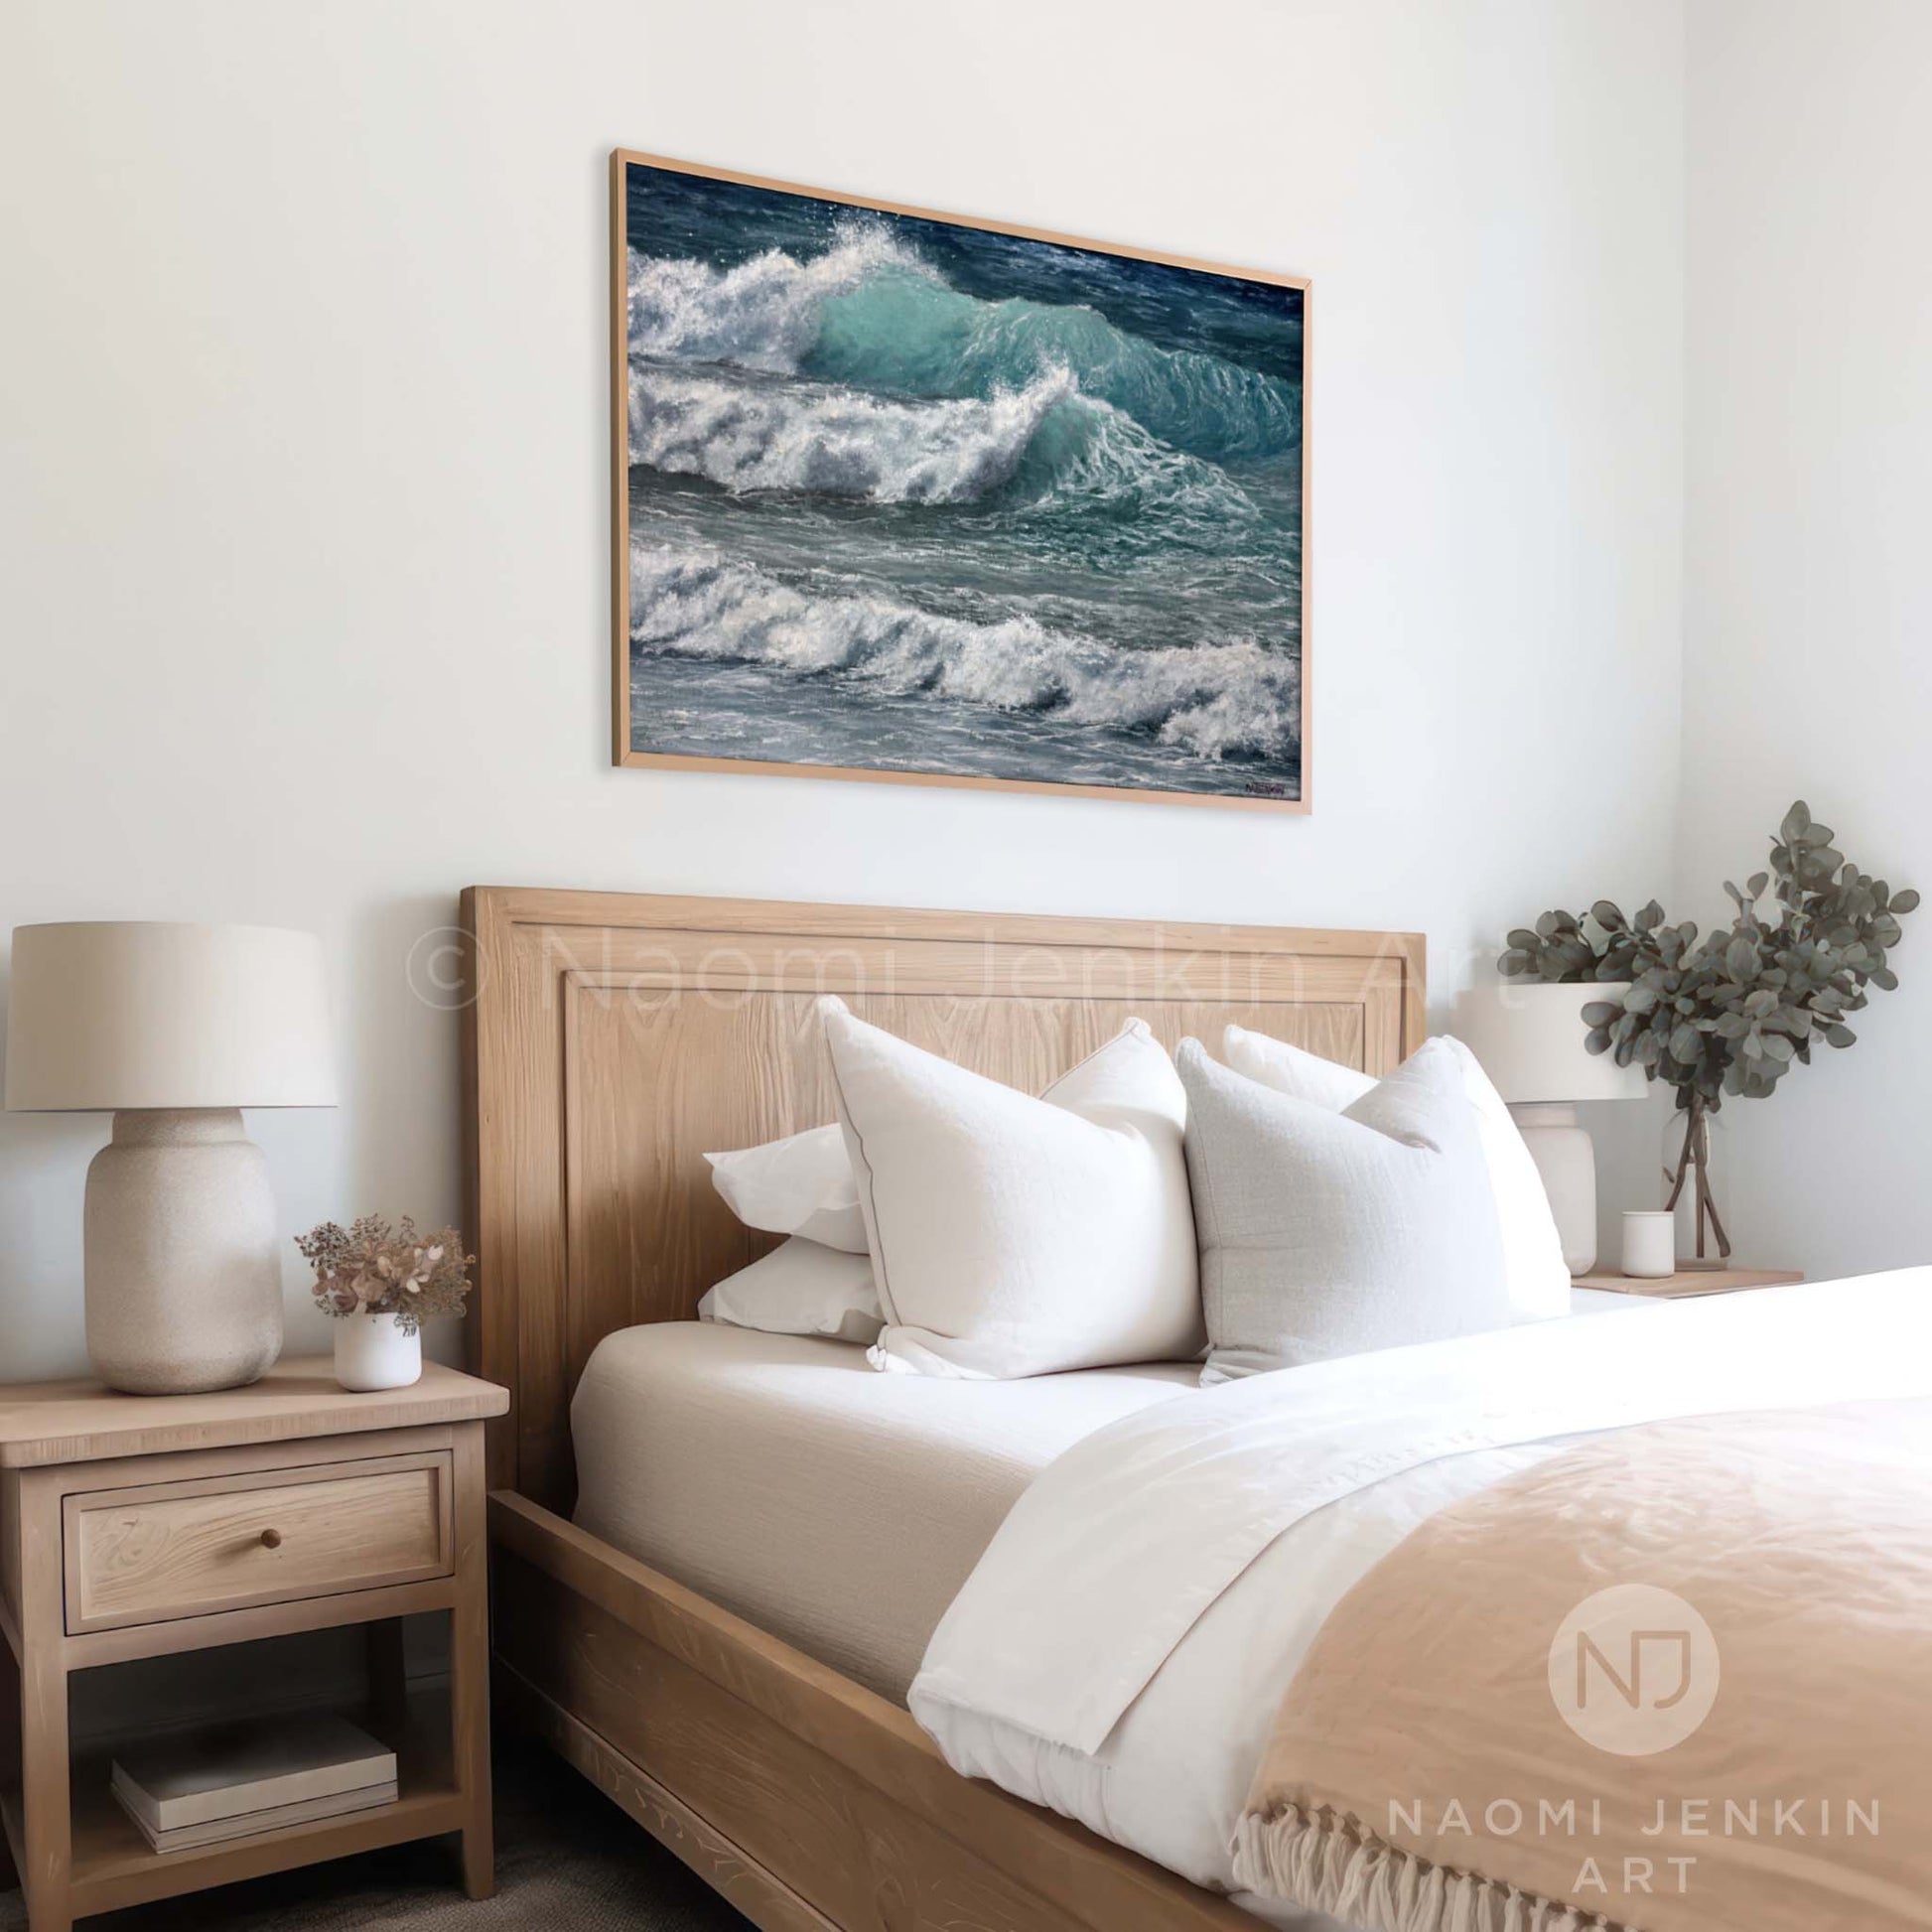 Framed seascape print 'Whitewater Waves' by seascape artist Naomi Jenkin in a bedroom setting